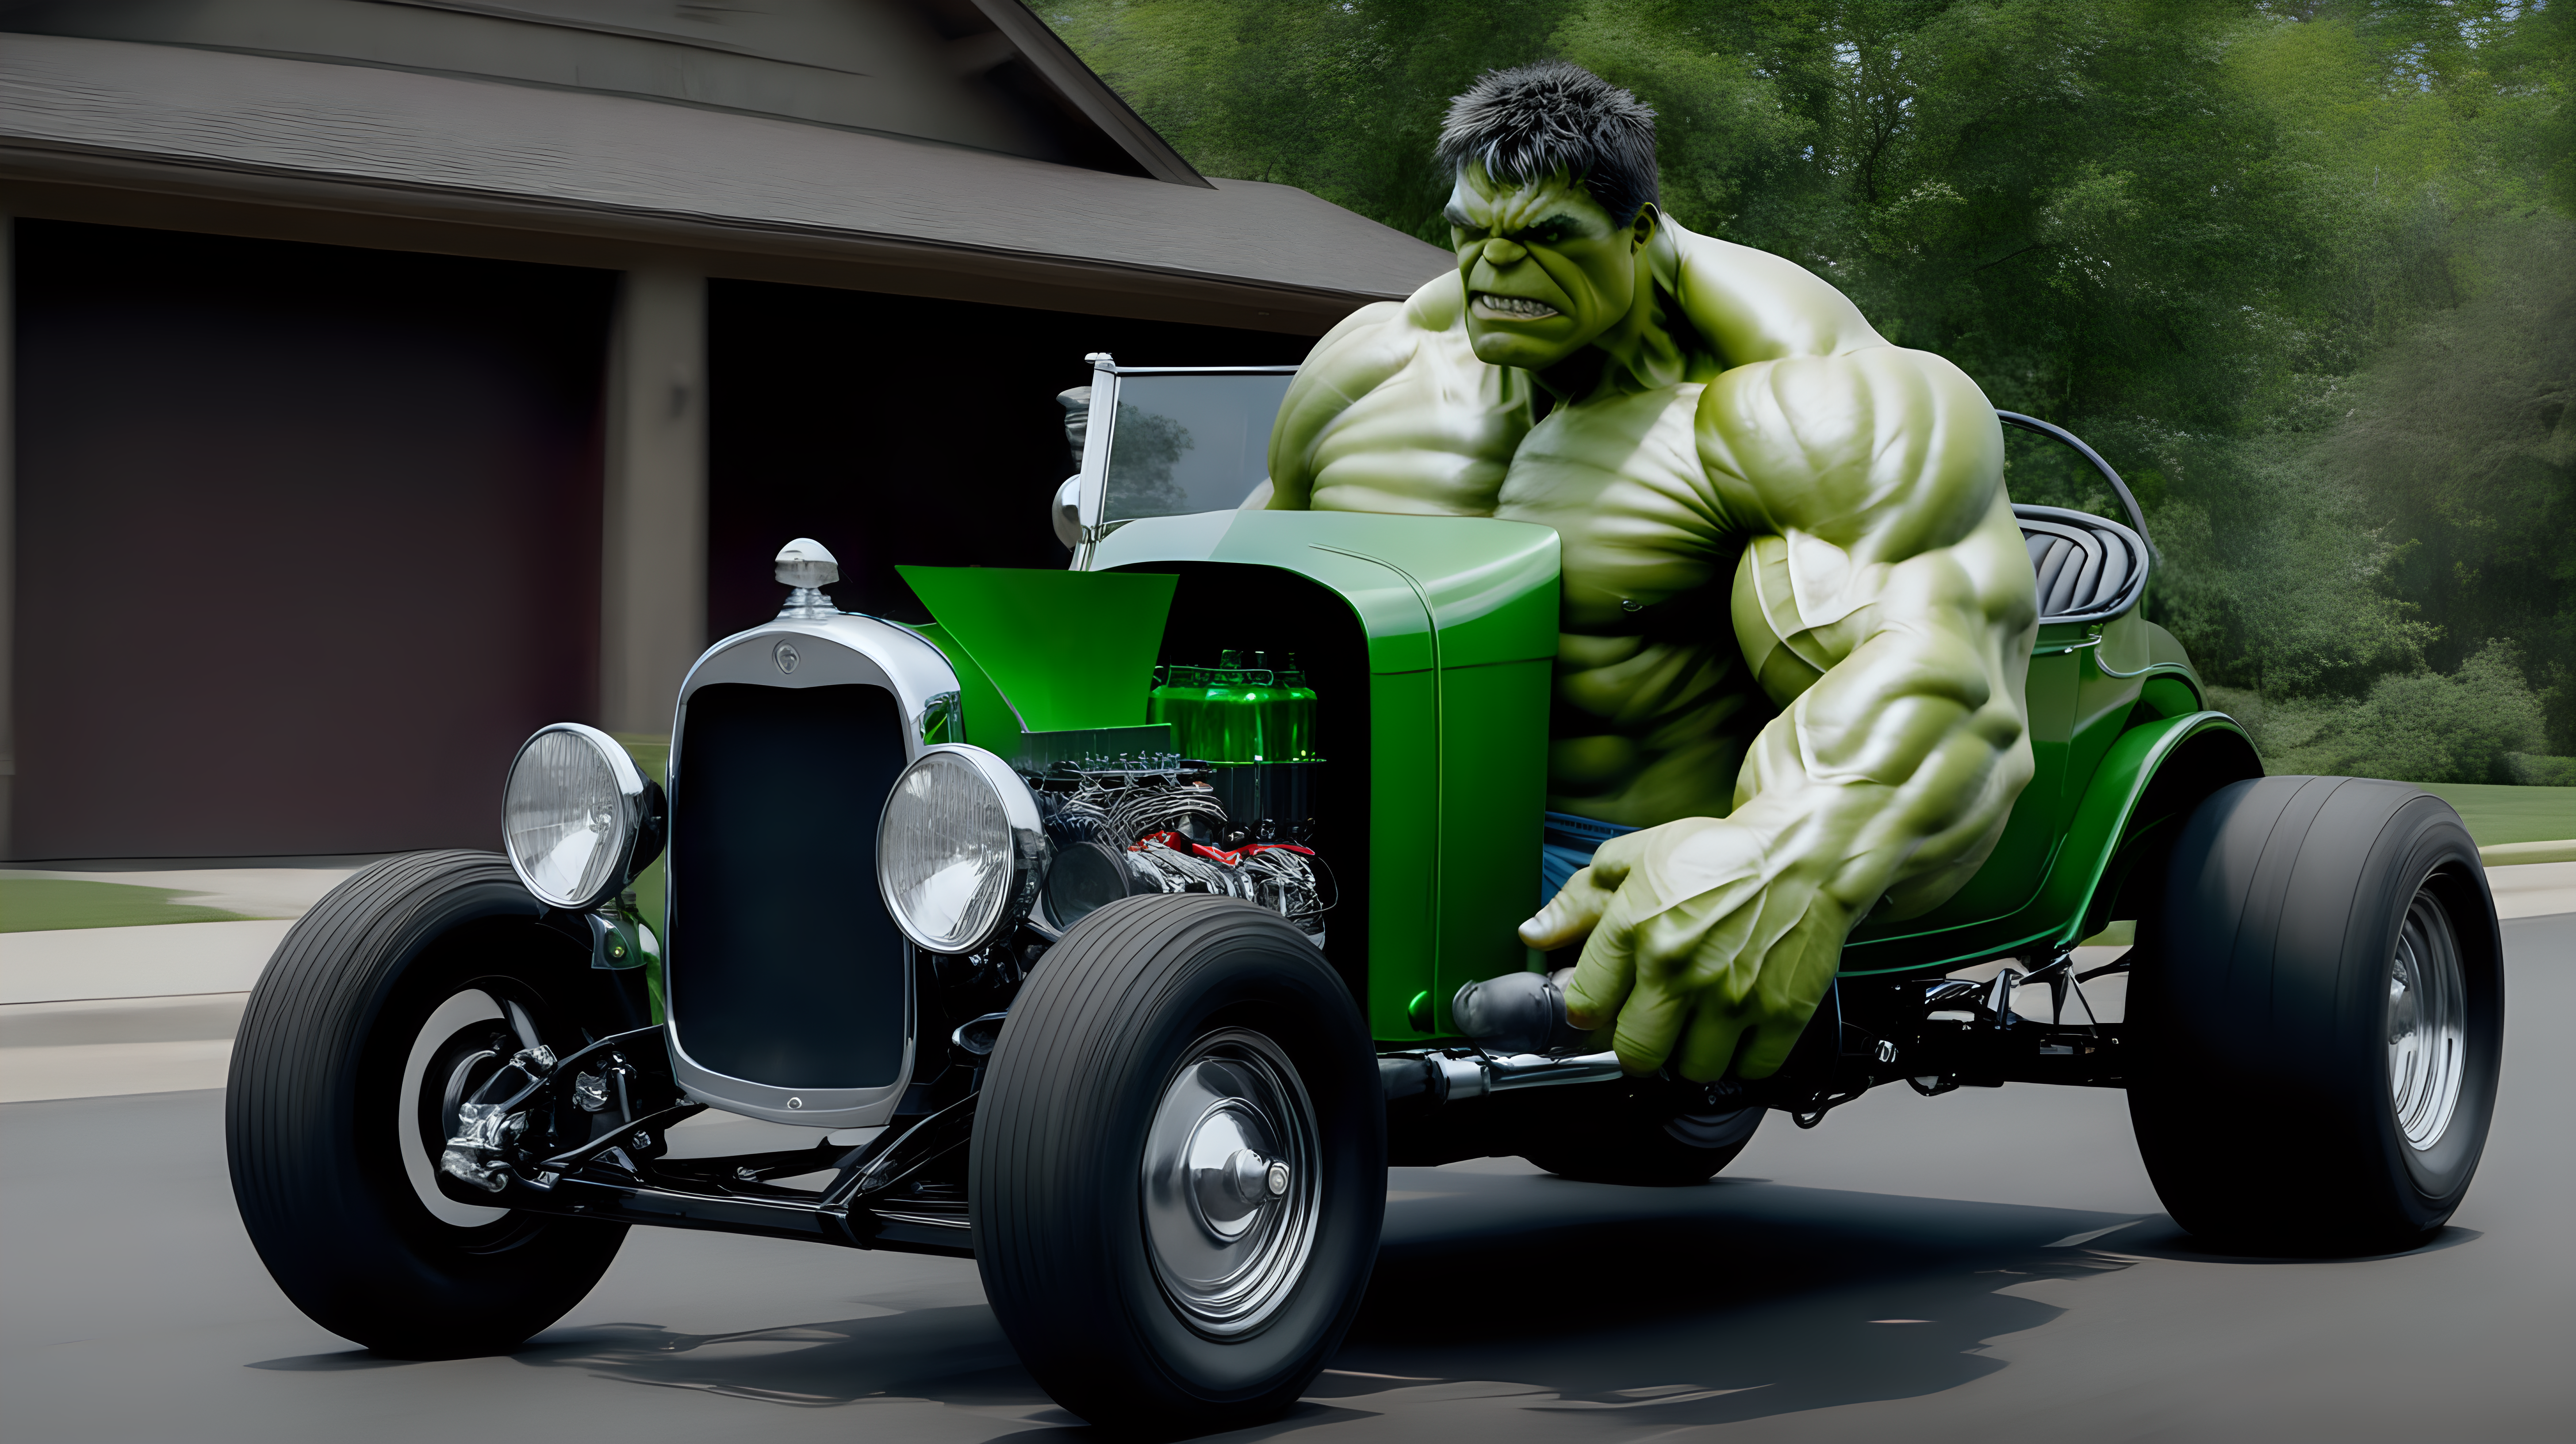 The Hulk sitting on a 1920s roadster